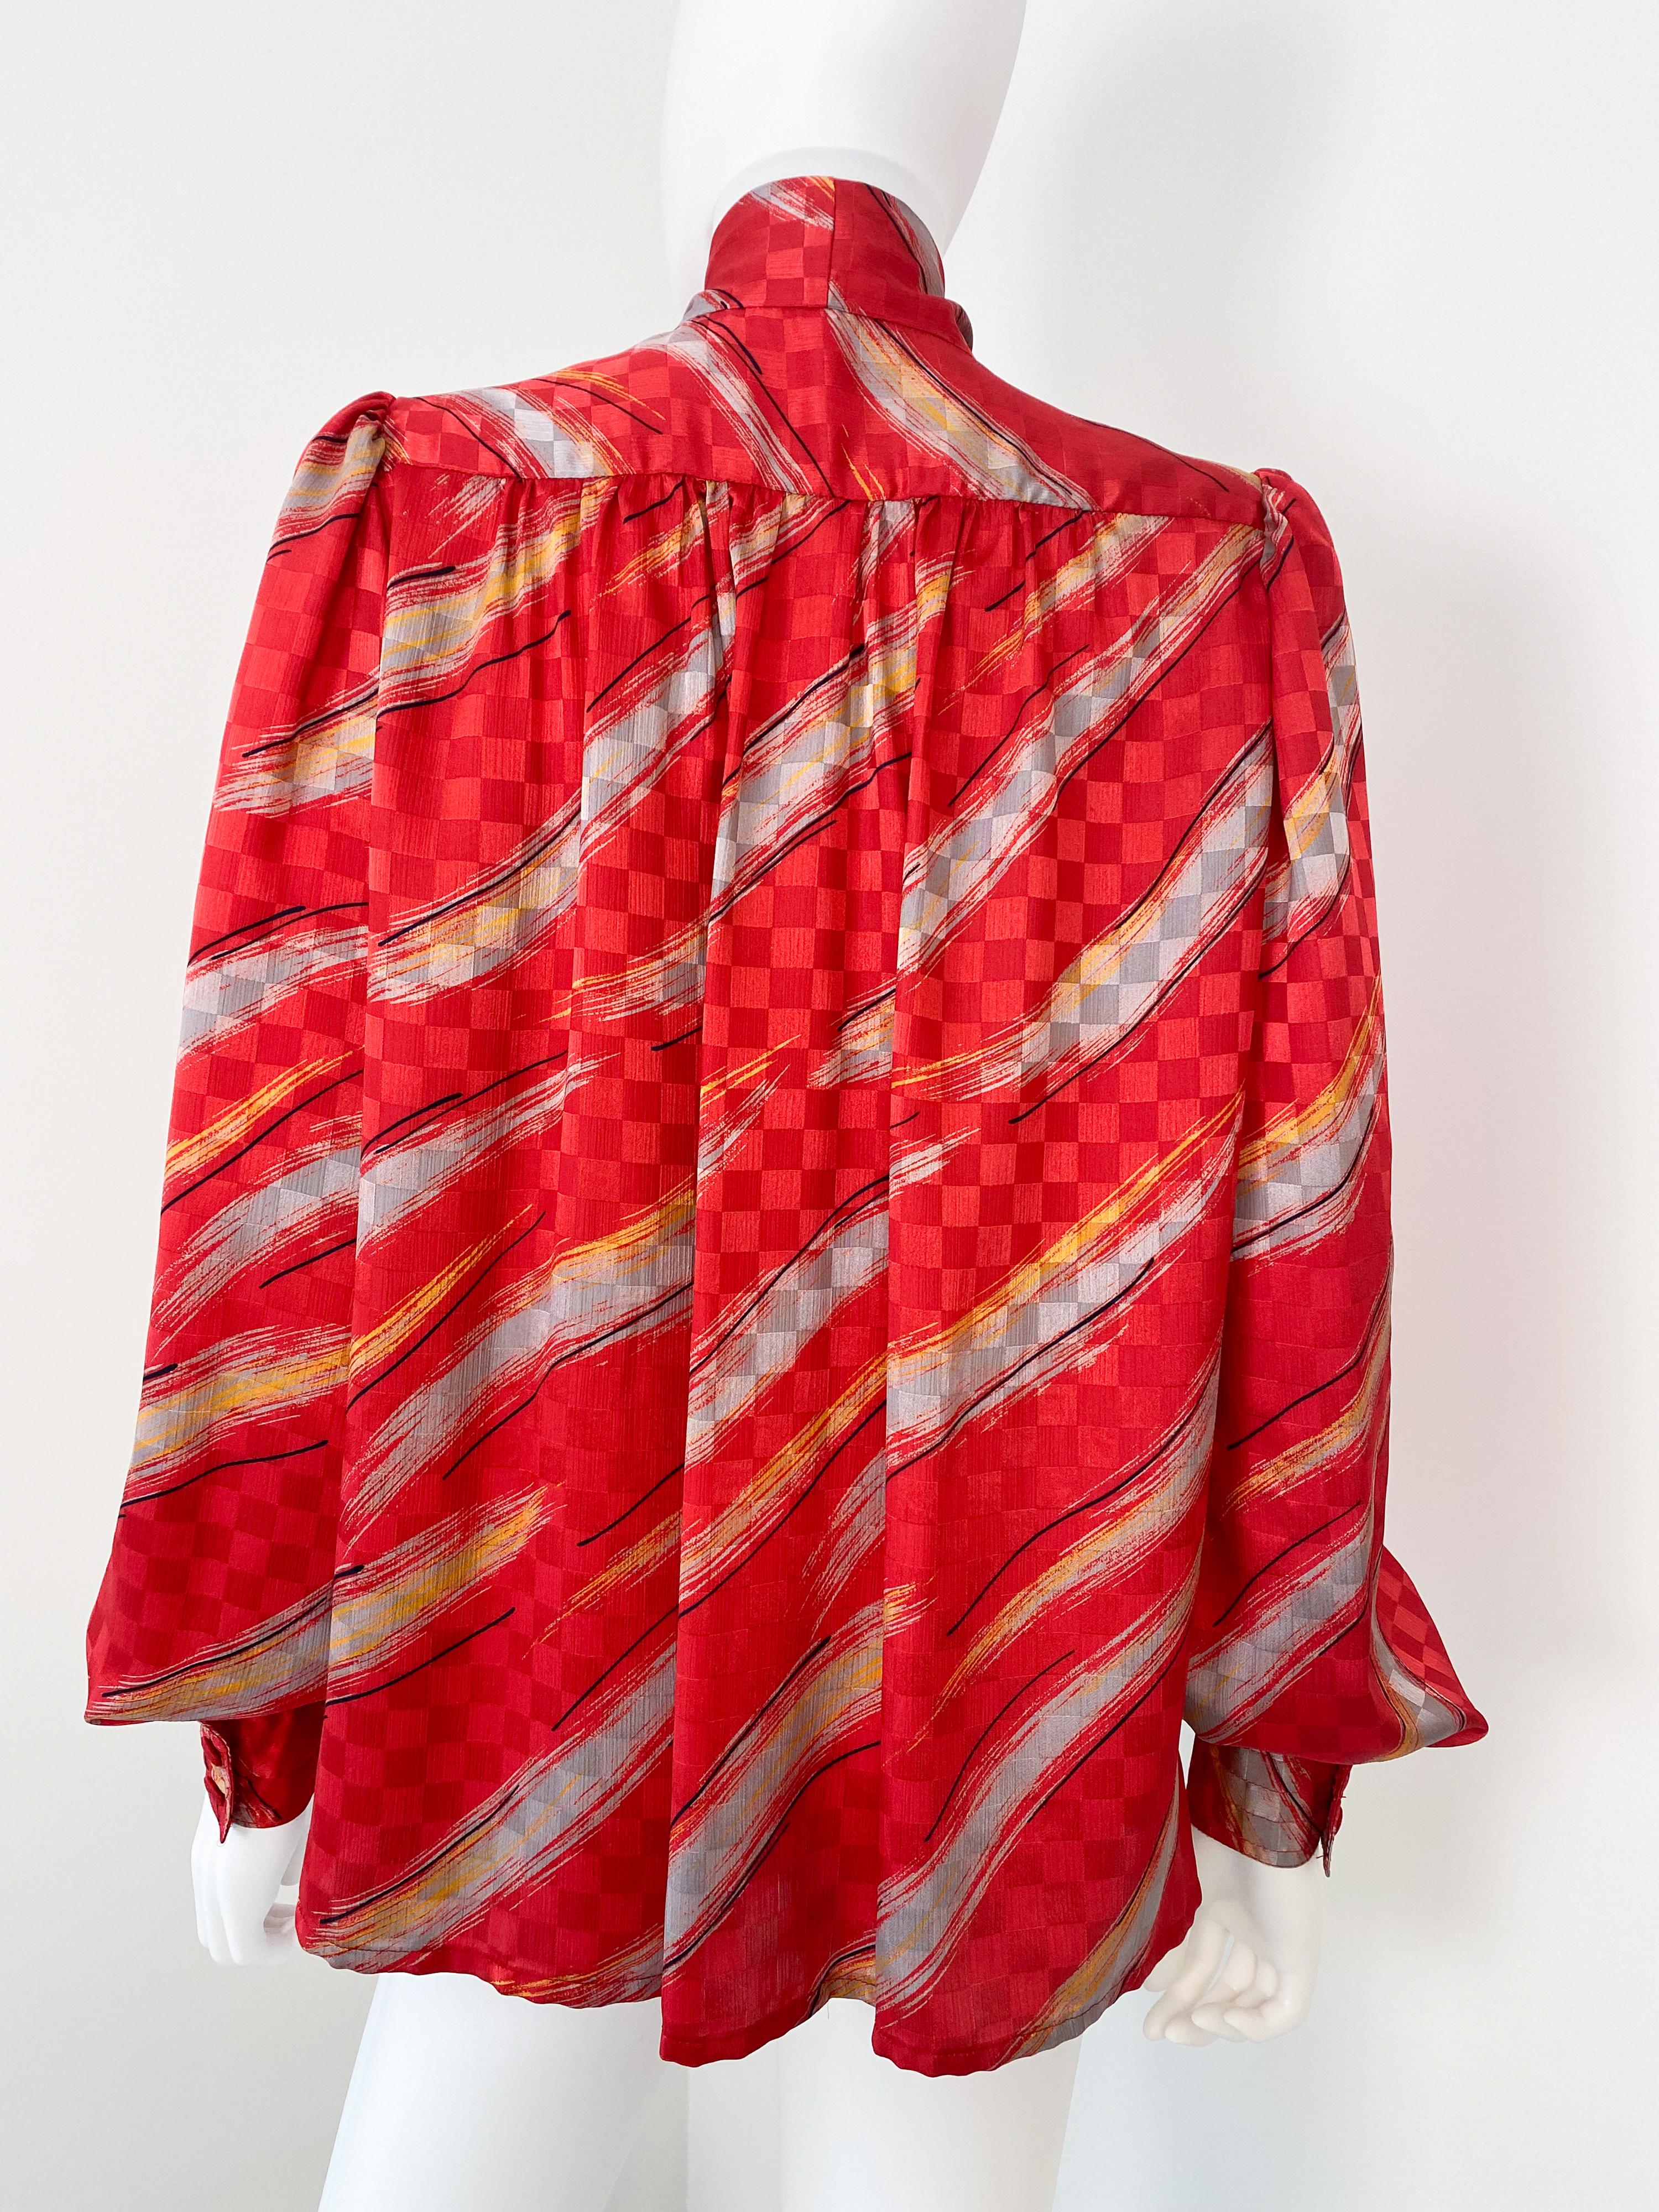 Vintage 1980s Silky Polyester Blouse Top Red and Gray Slashes Size 10/12 For Sale 5